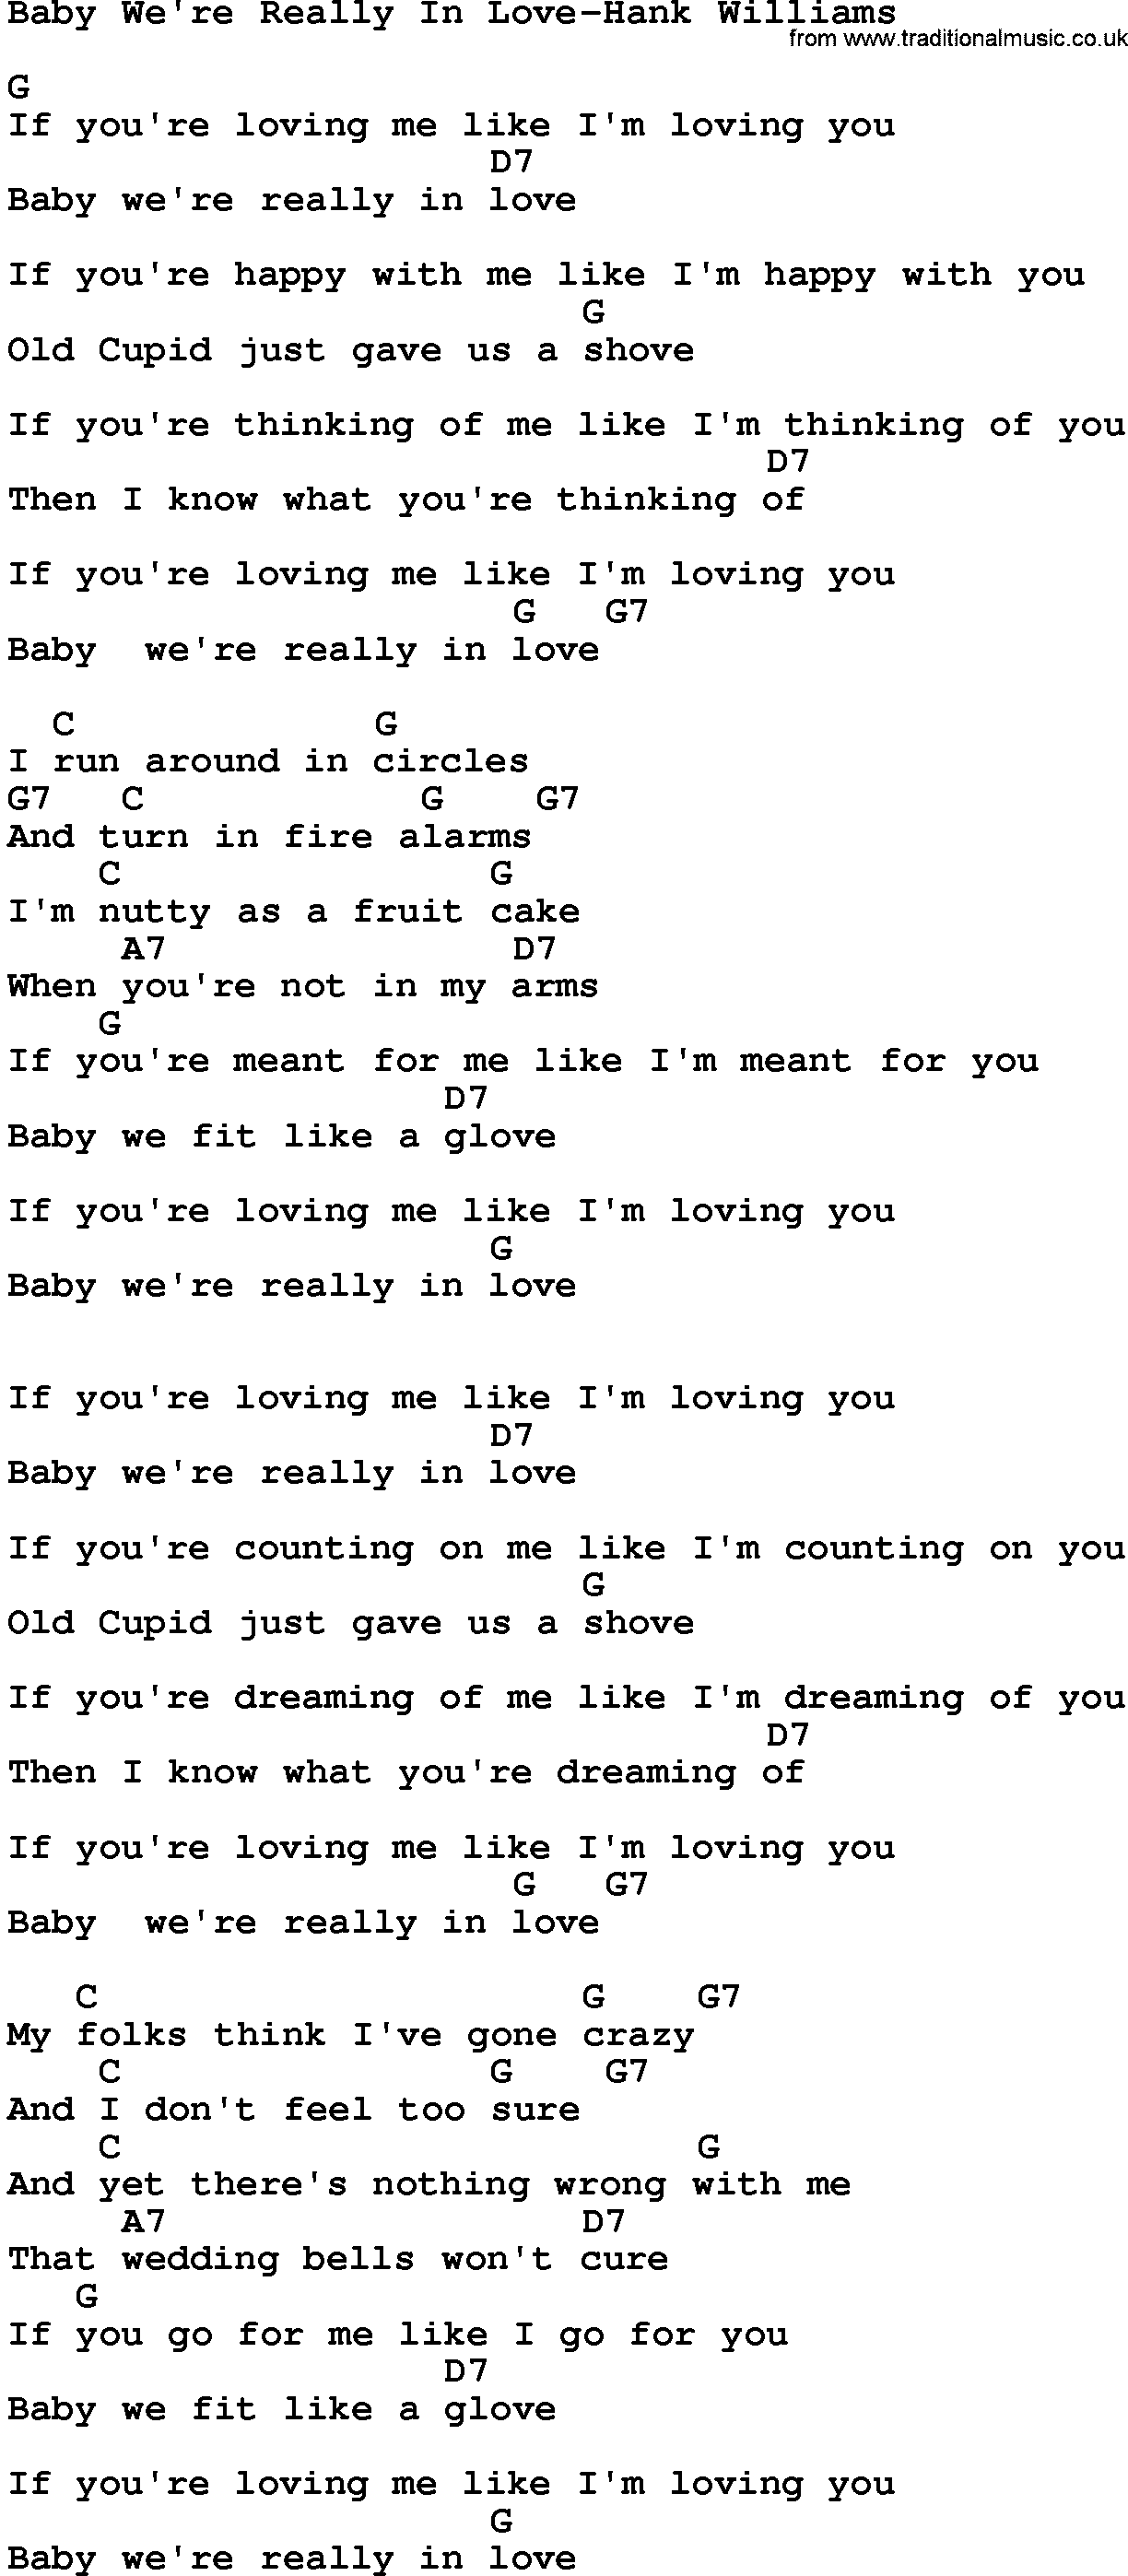 Country music song: Baby We're Really In Love-Hank Williams lyrics and chords